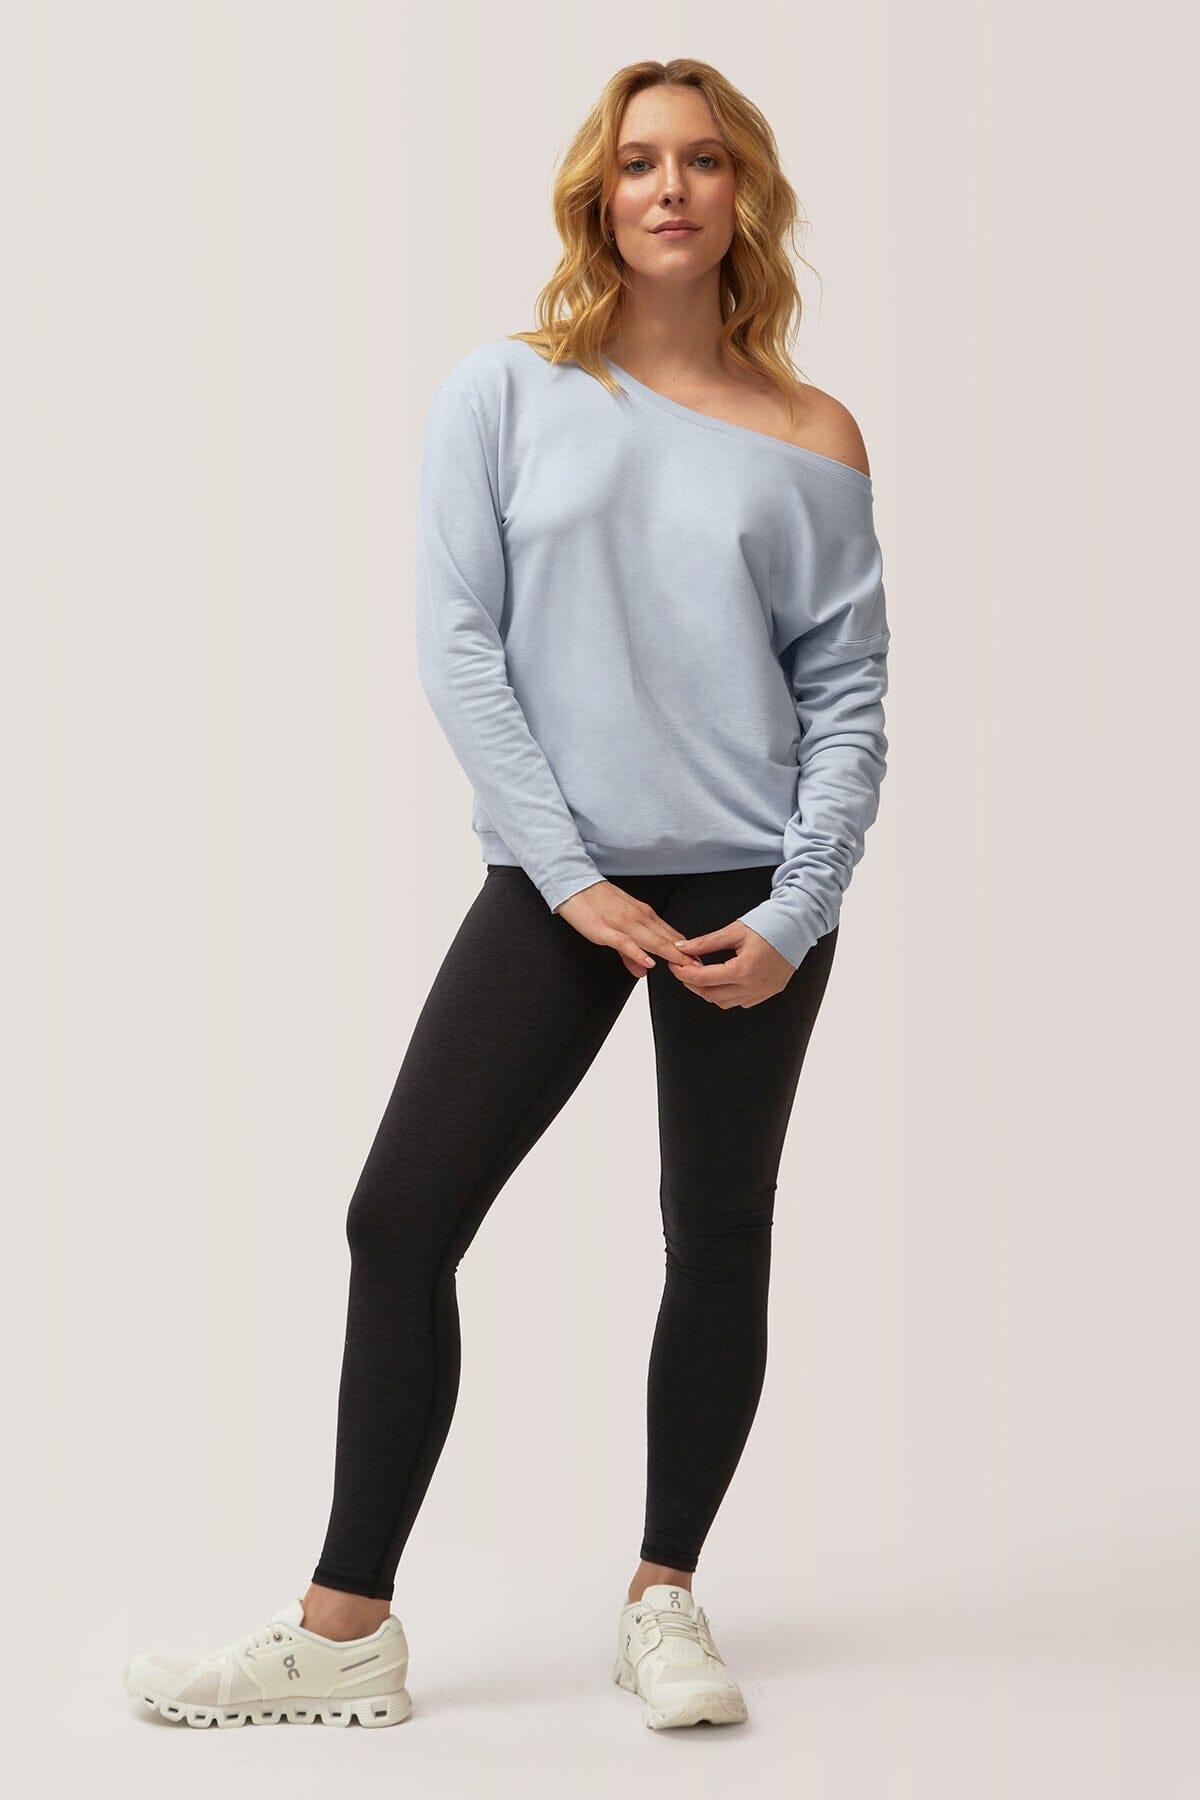 Femme qui porte le chandail Flashdance de Rose Boreal./ Women wearing the Flashdance pullover from Rose Boreal. - Cloudy Sky